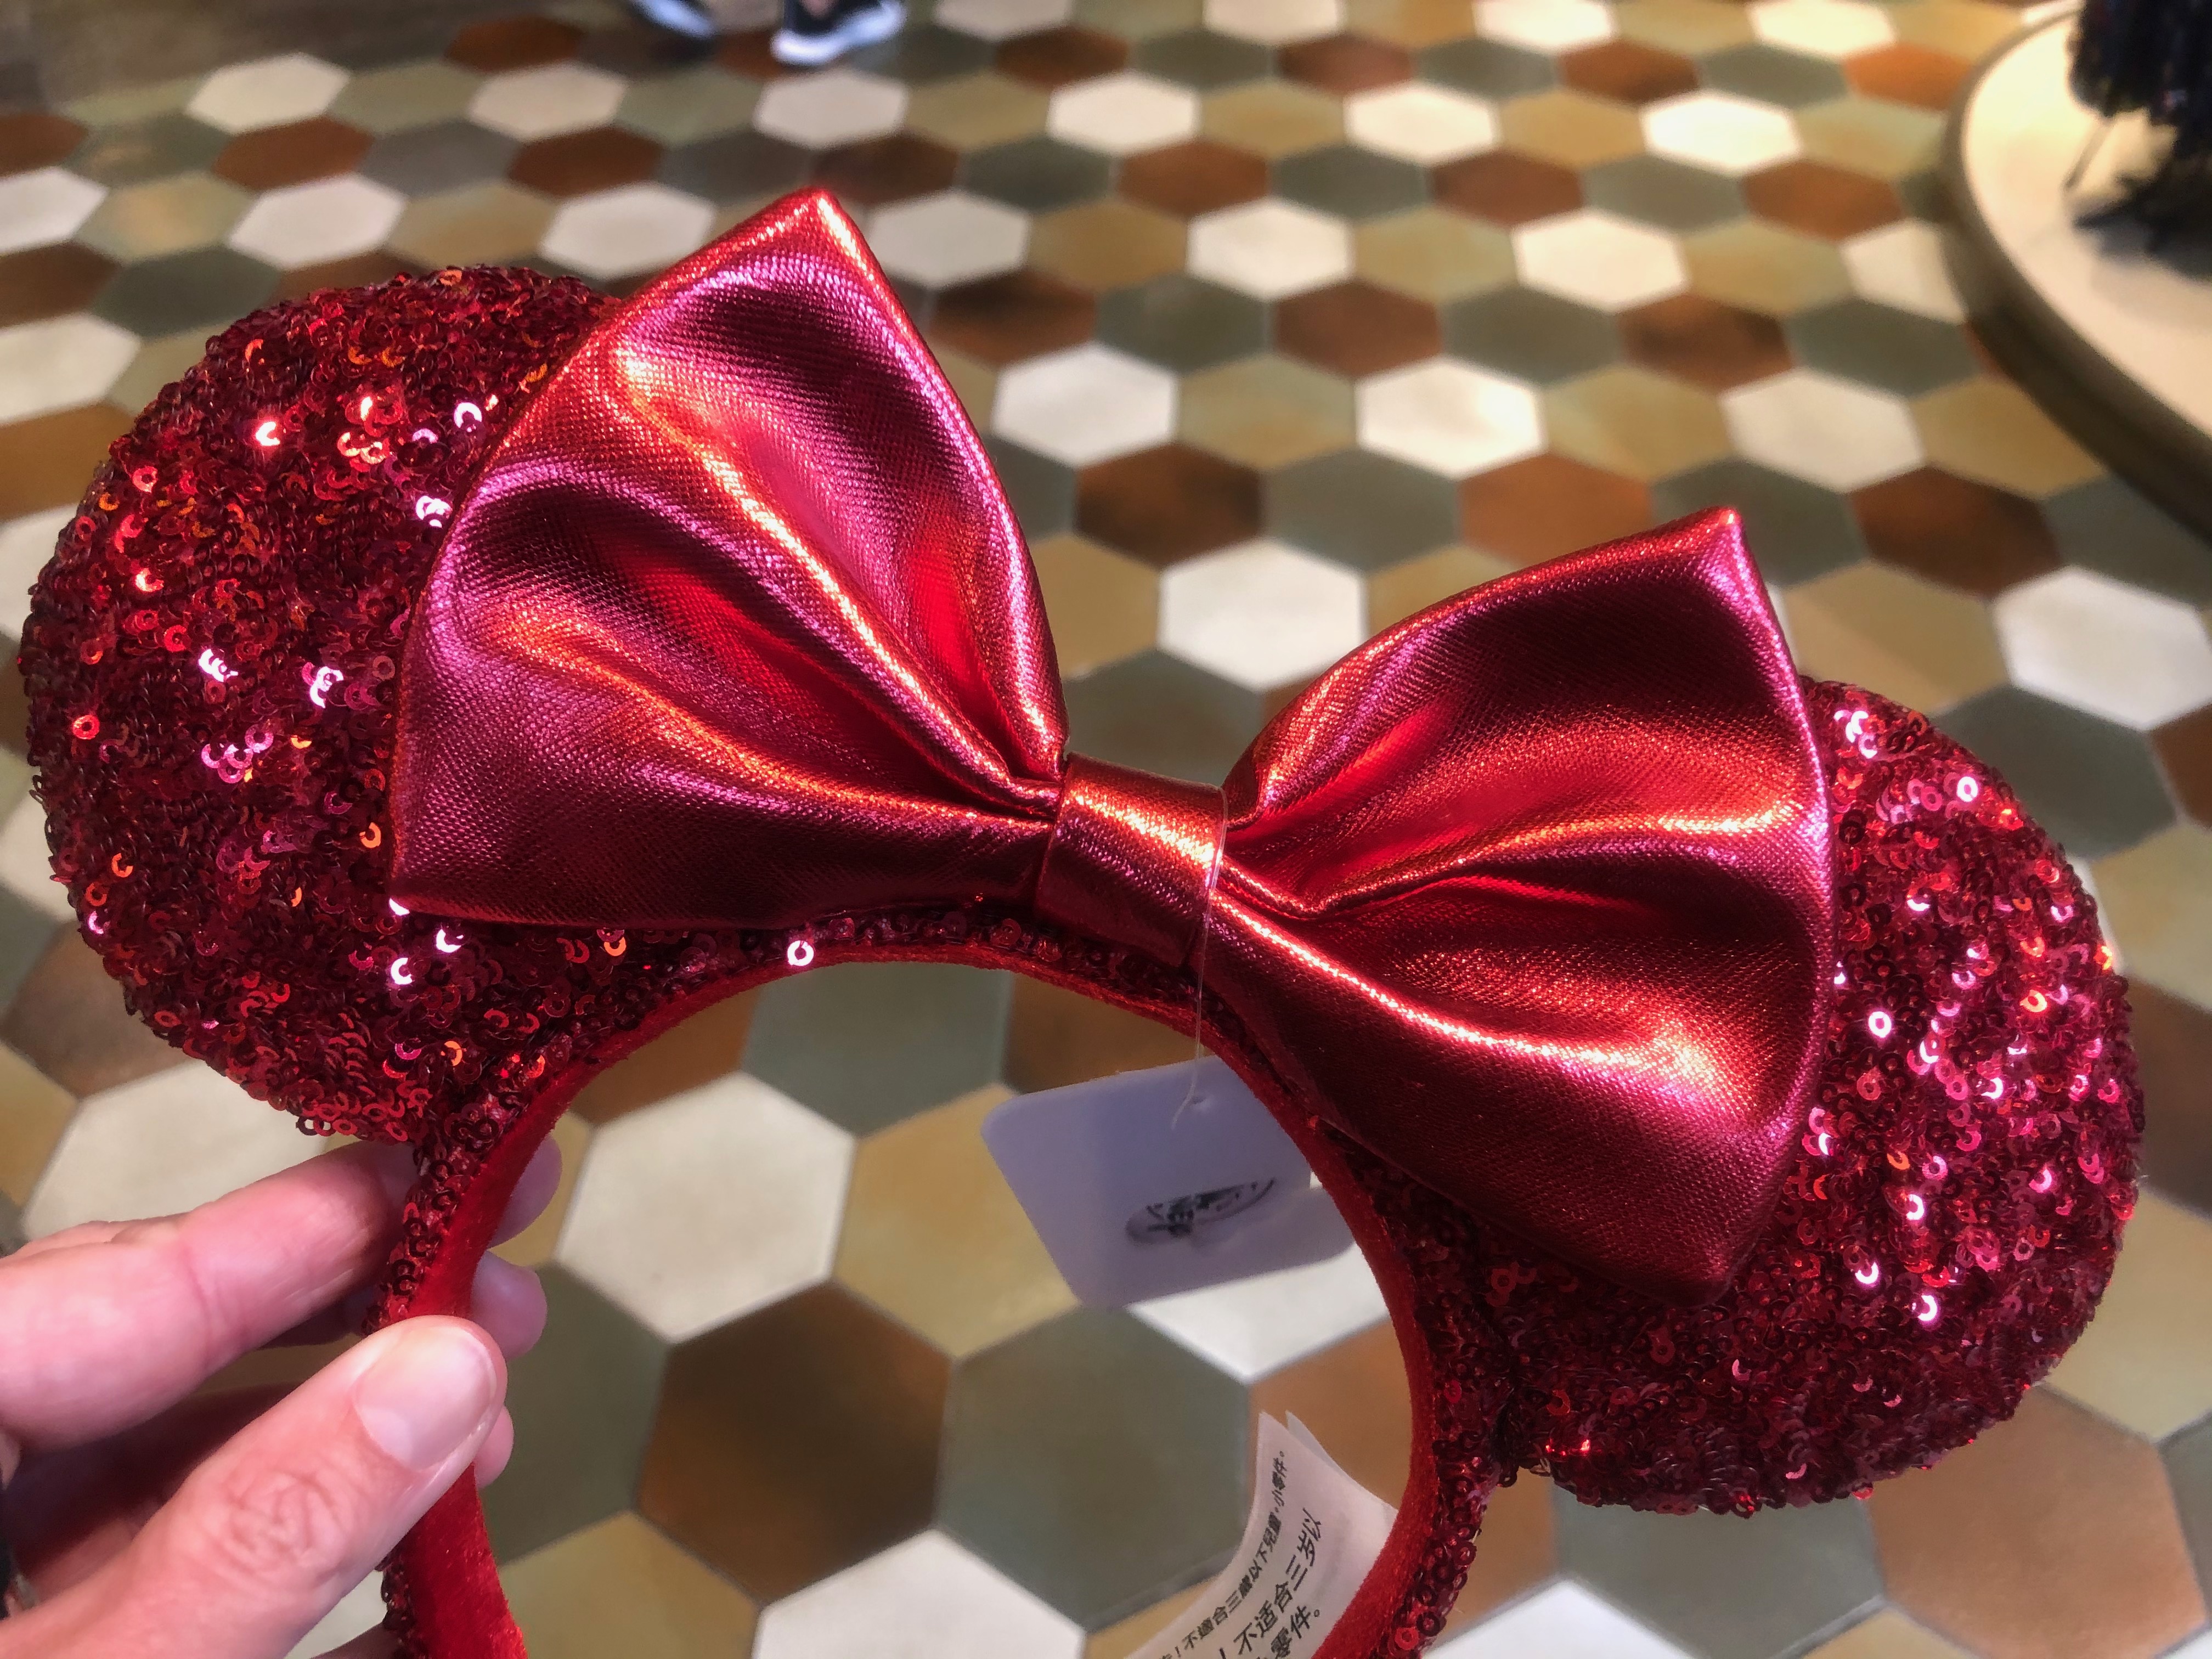 PHOTOS: New Redd Sequin Holiday Minnie Ears Arrive Just In Time for the ...